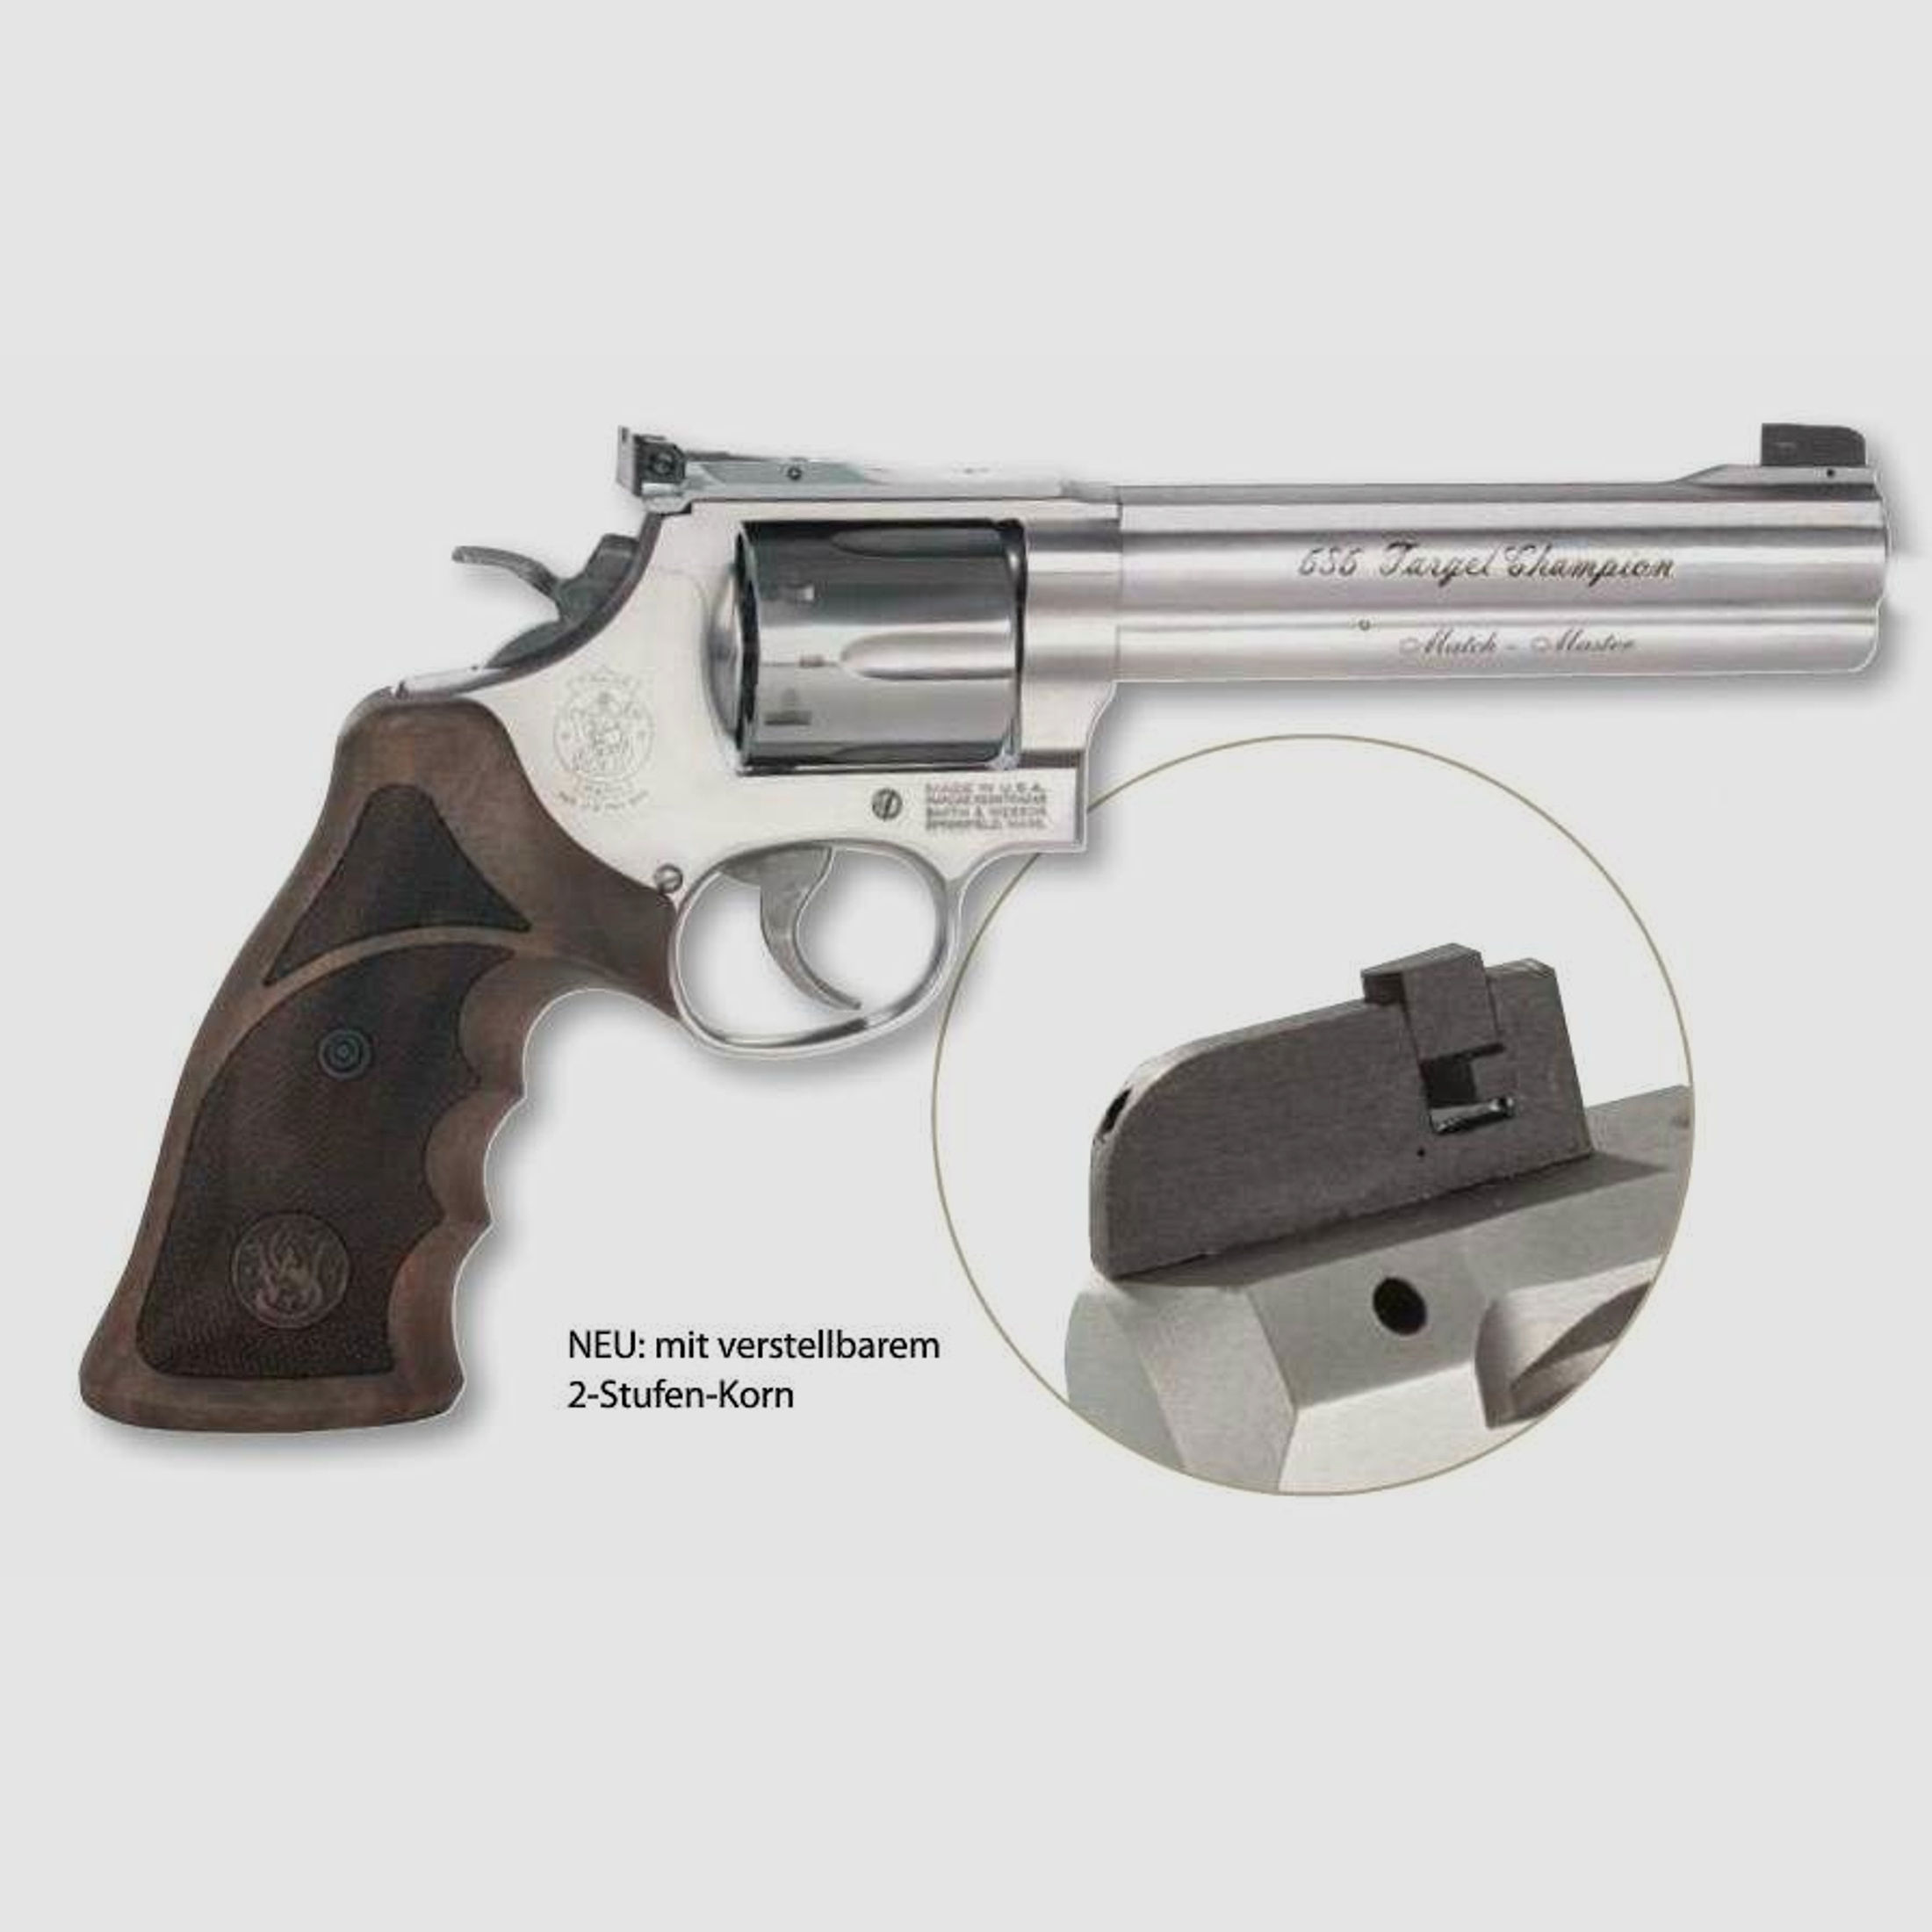 Smith & Wesson	 686 Target Champion Match Master